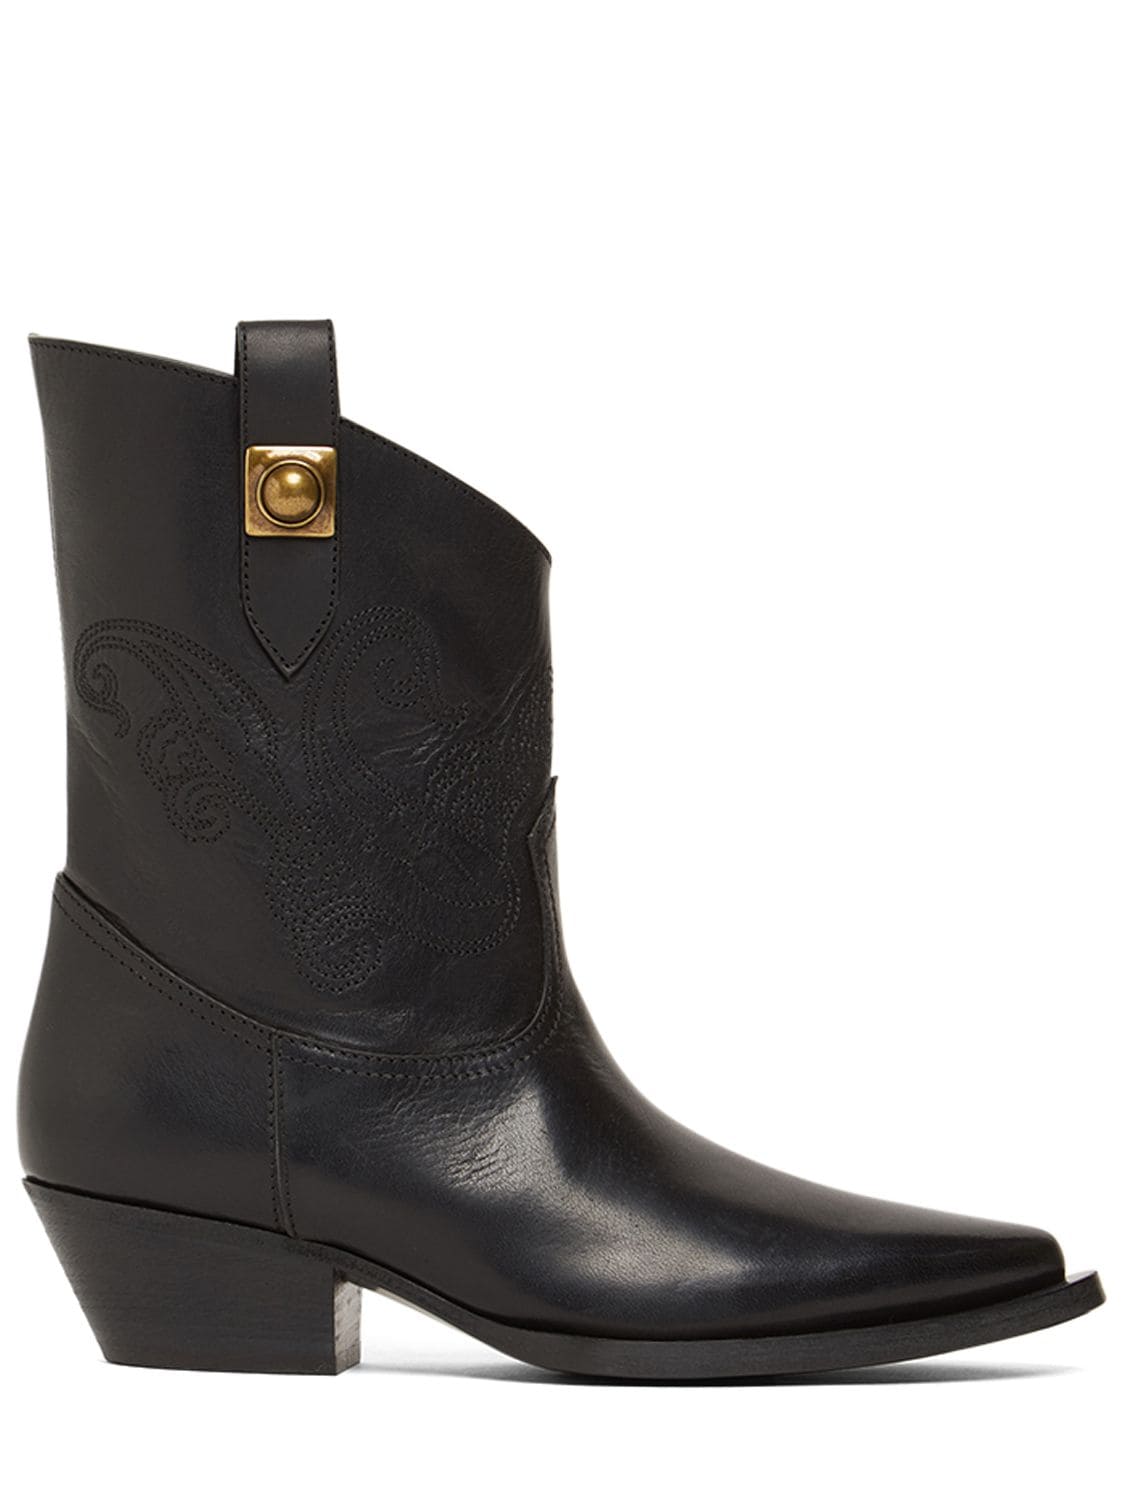 40mm Western Leather Ankle Boots